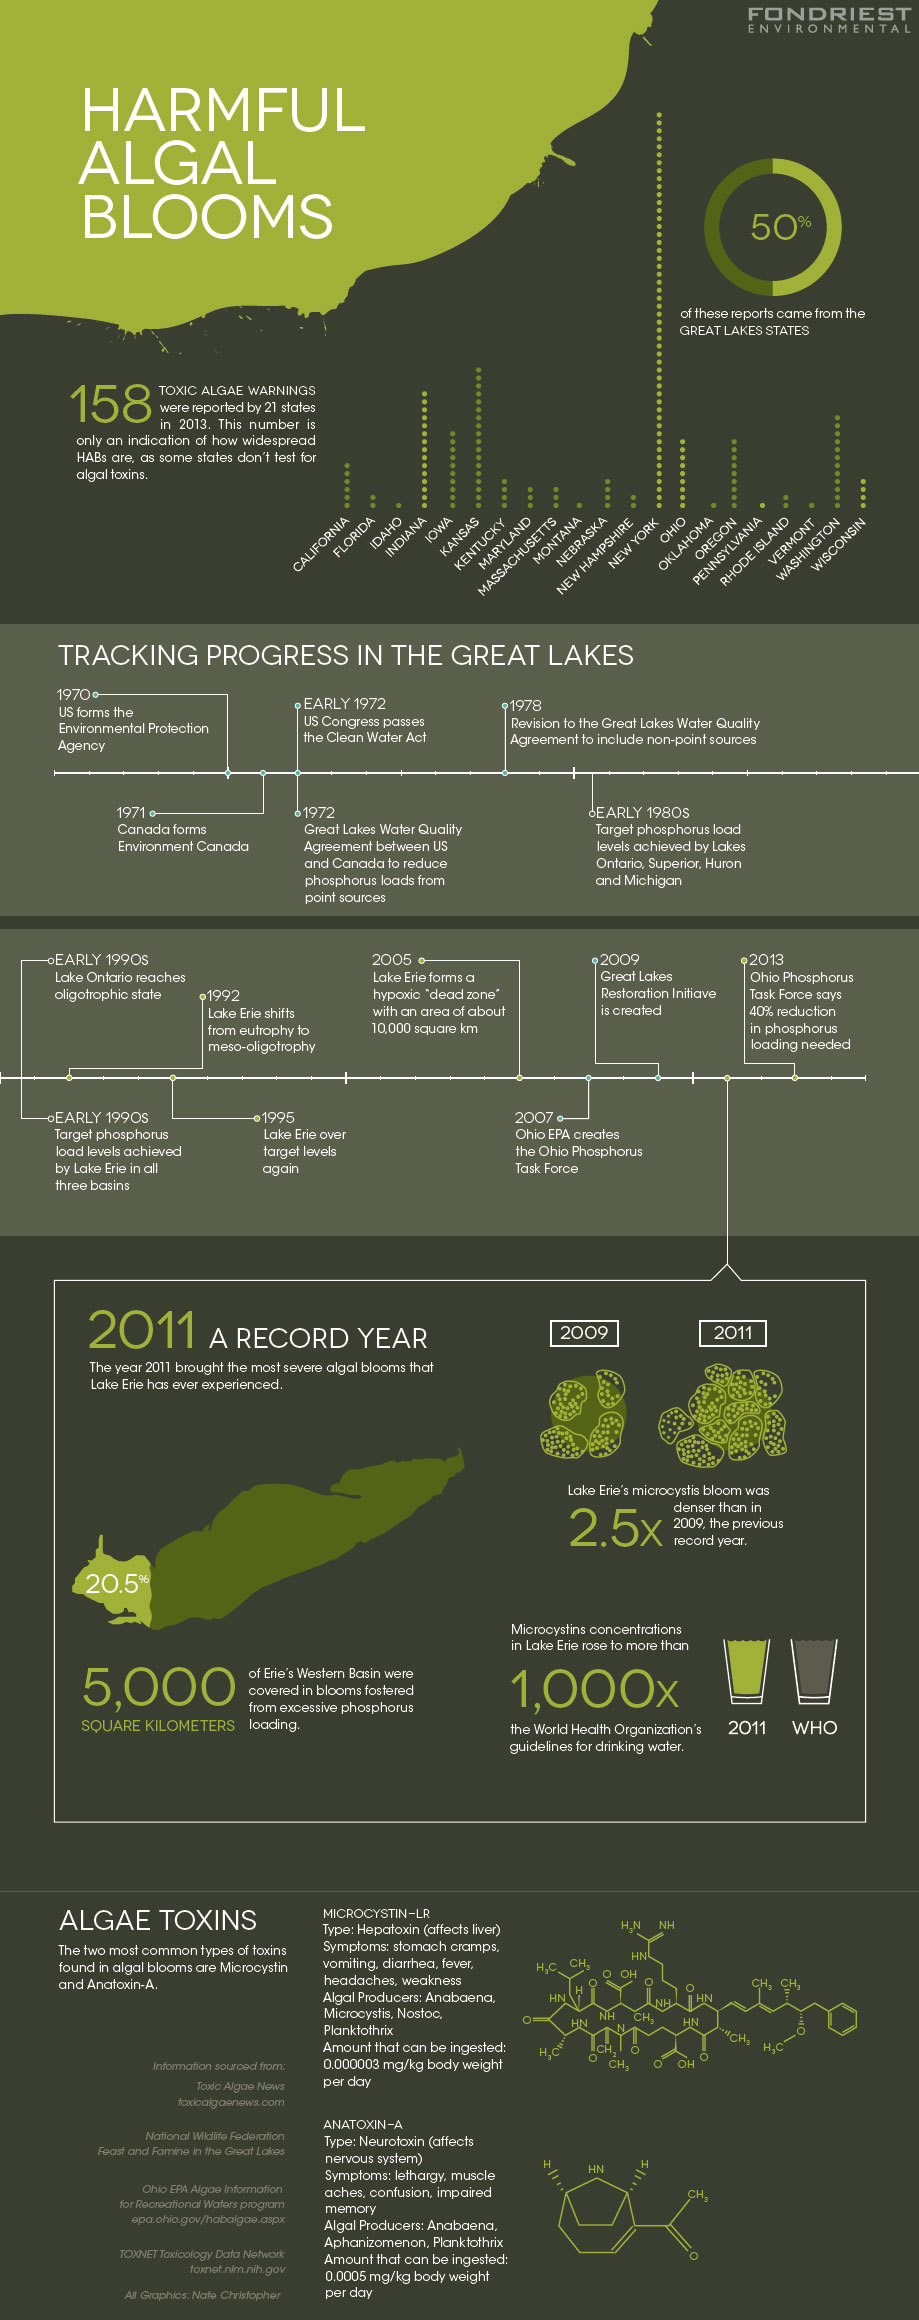 Algal blooms infographic (Credit: Nate Christopher)